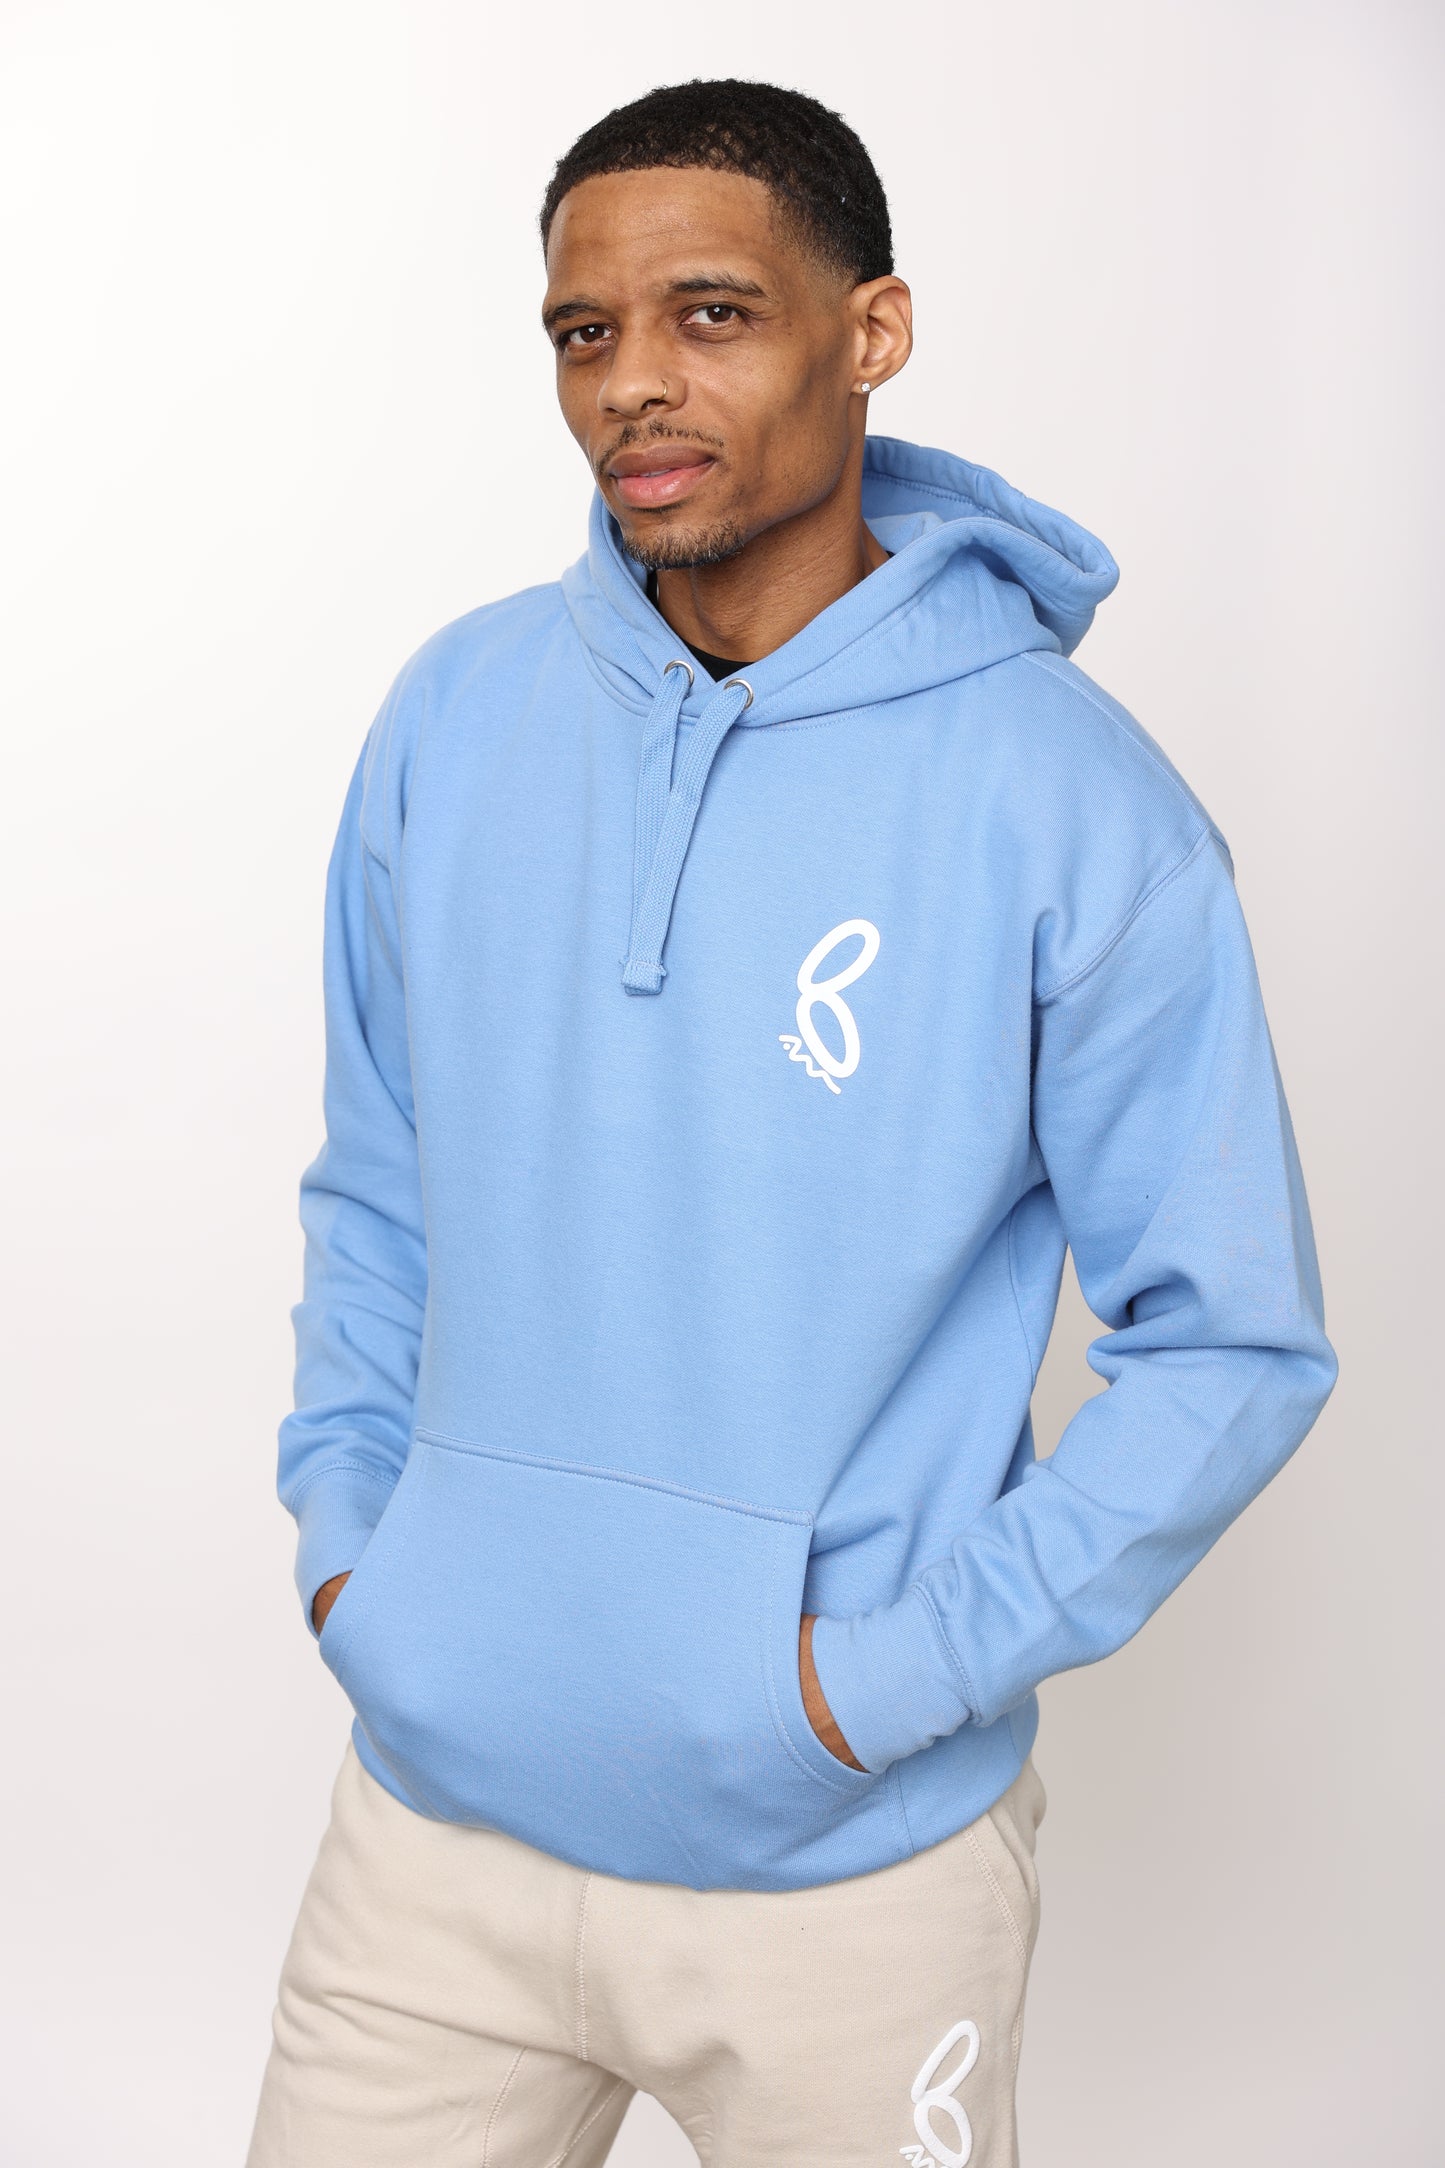 Ambitious & Motivated Hoodie - Powder Blue